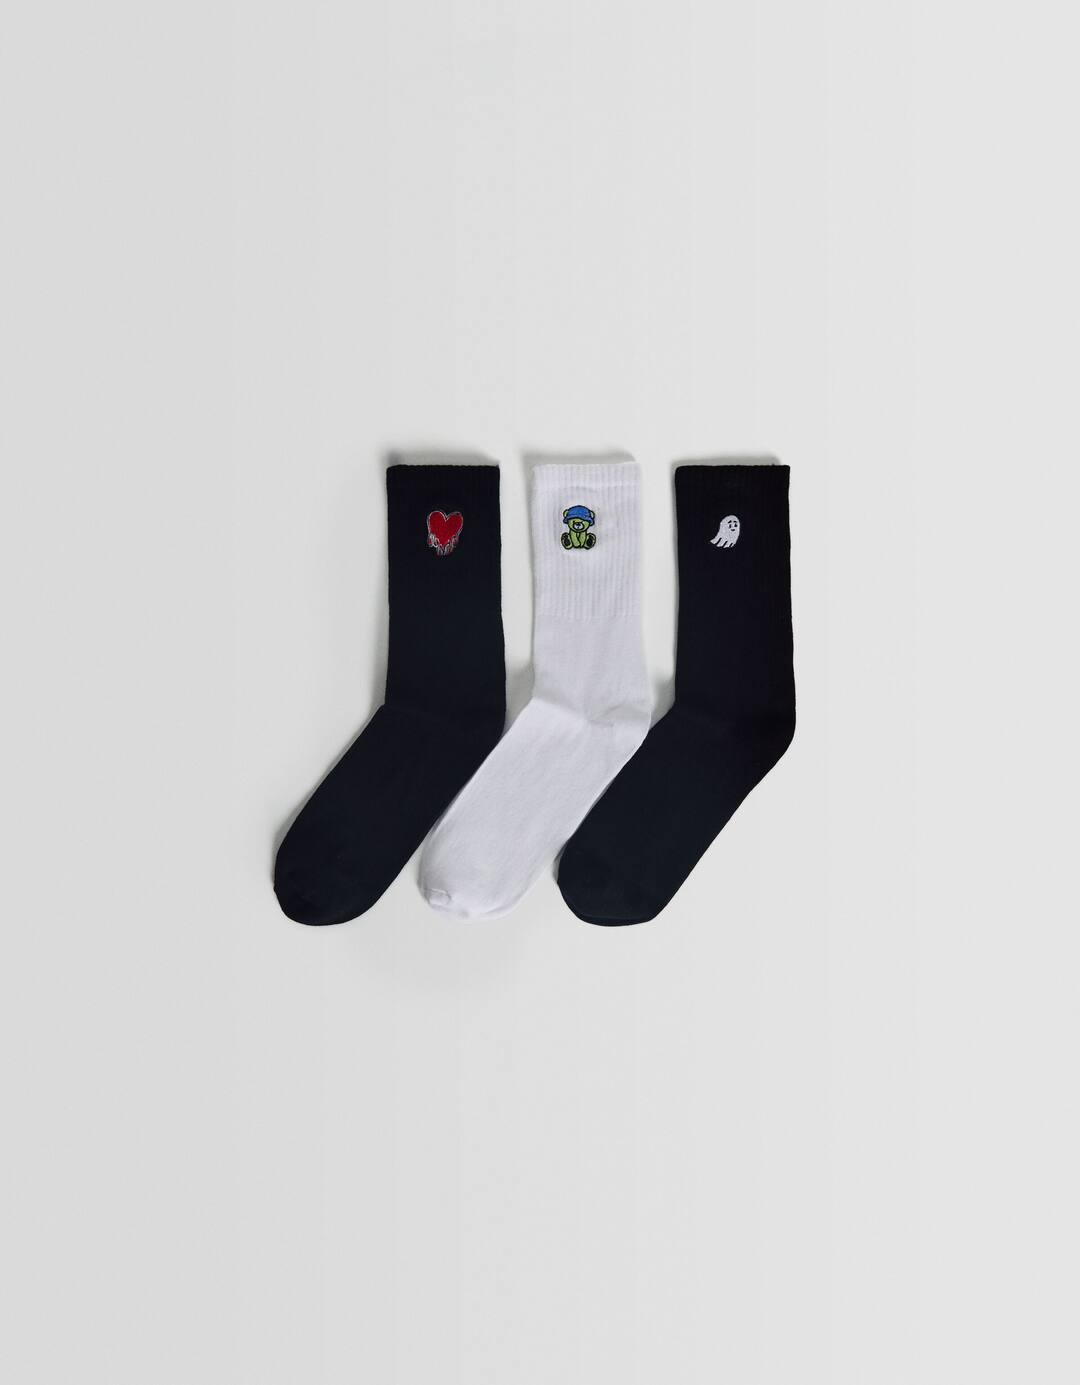 Pack of 3 pairs of embroidered Stitch socks